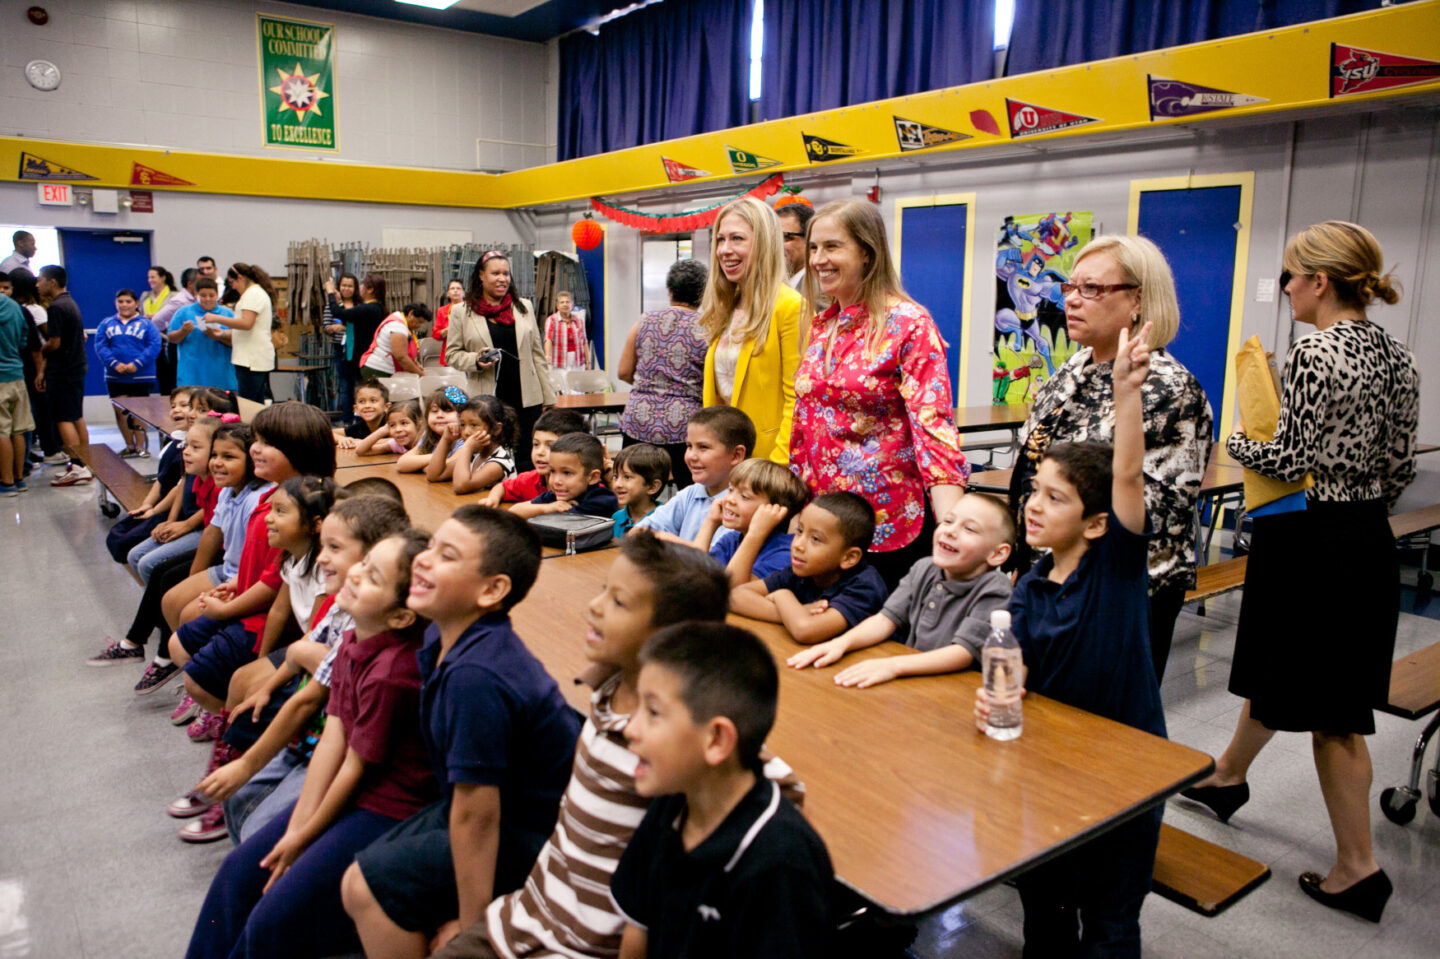 Chelsea Clinton visits students at an elementary school in California